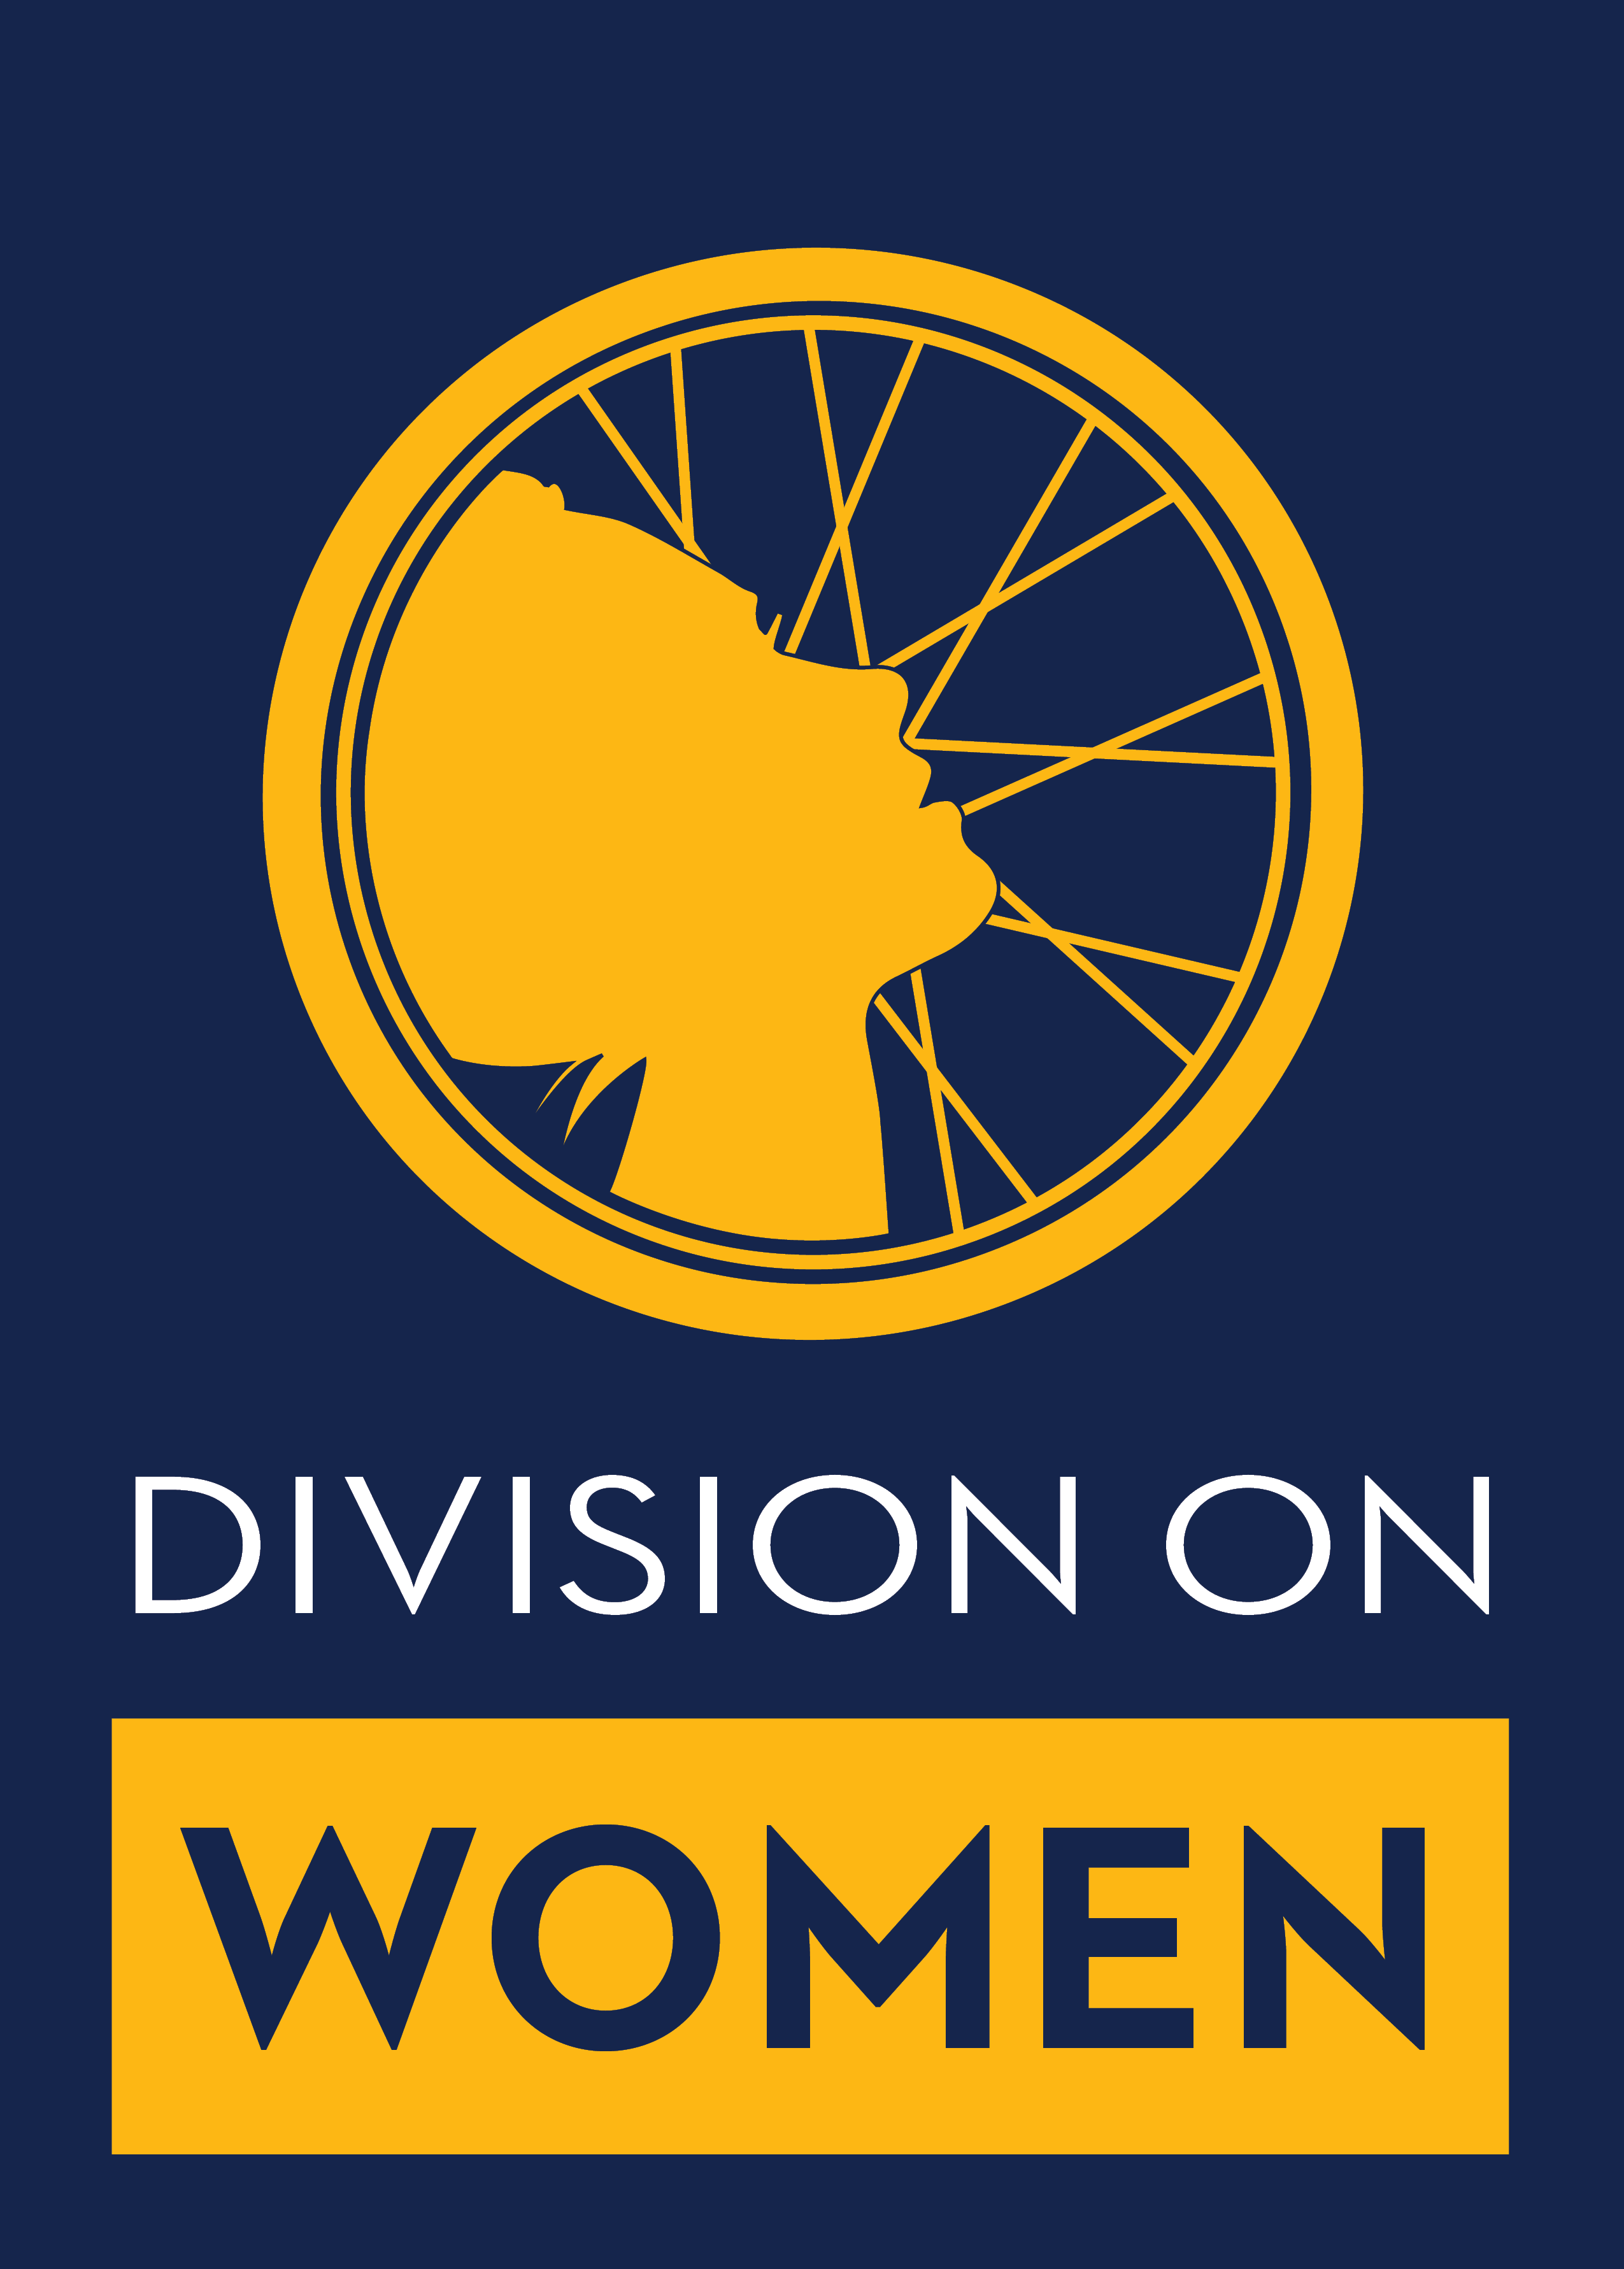 Division on Women